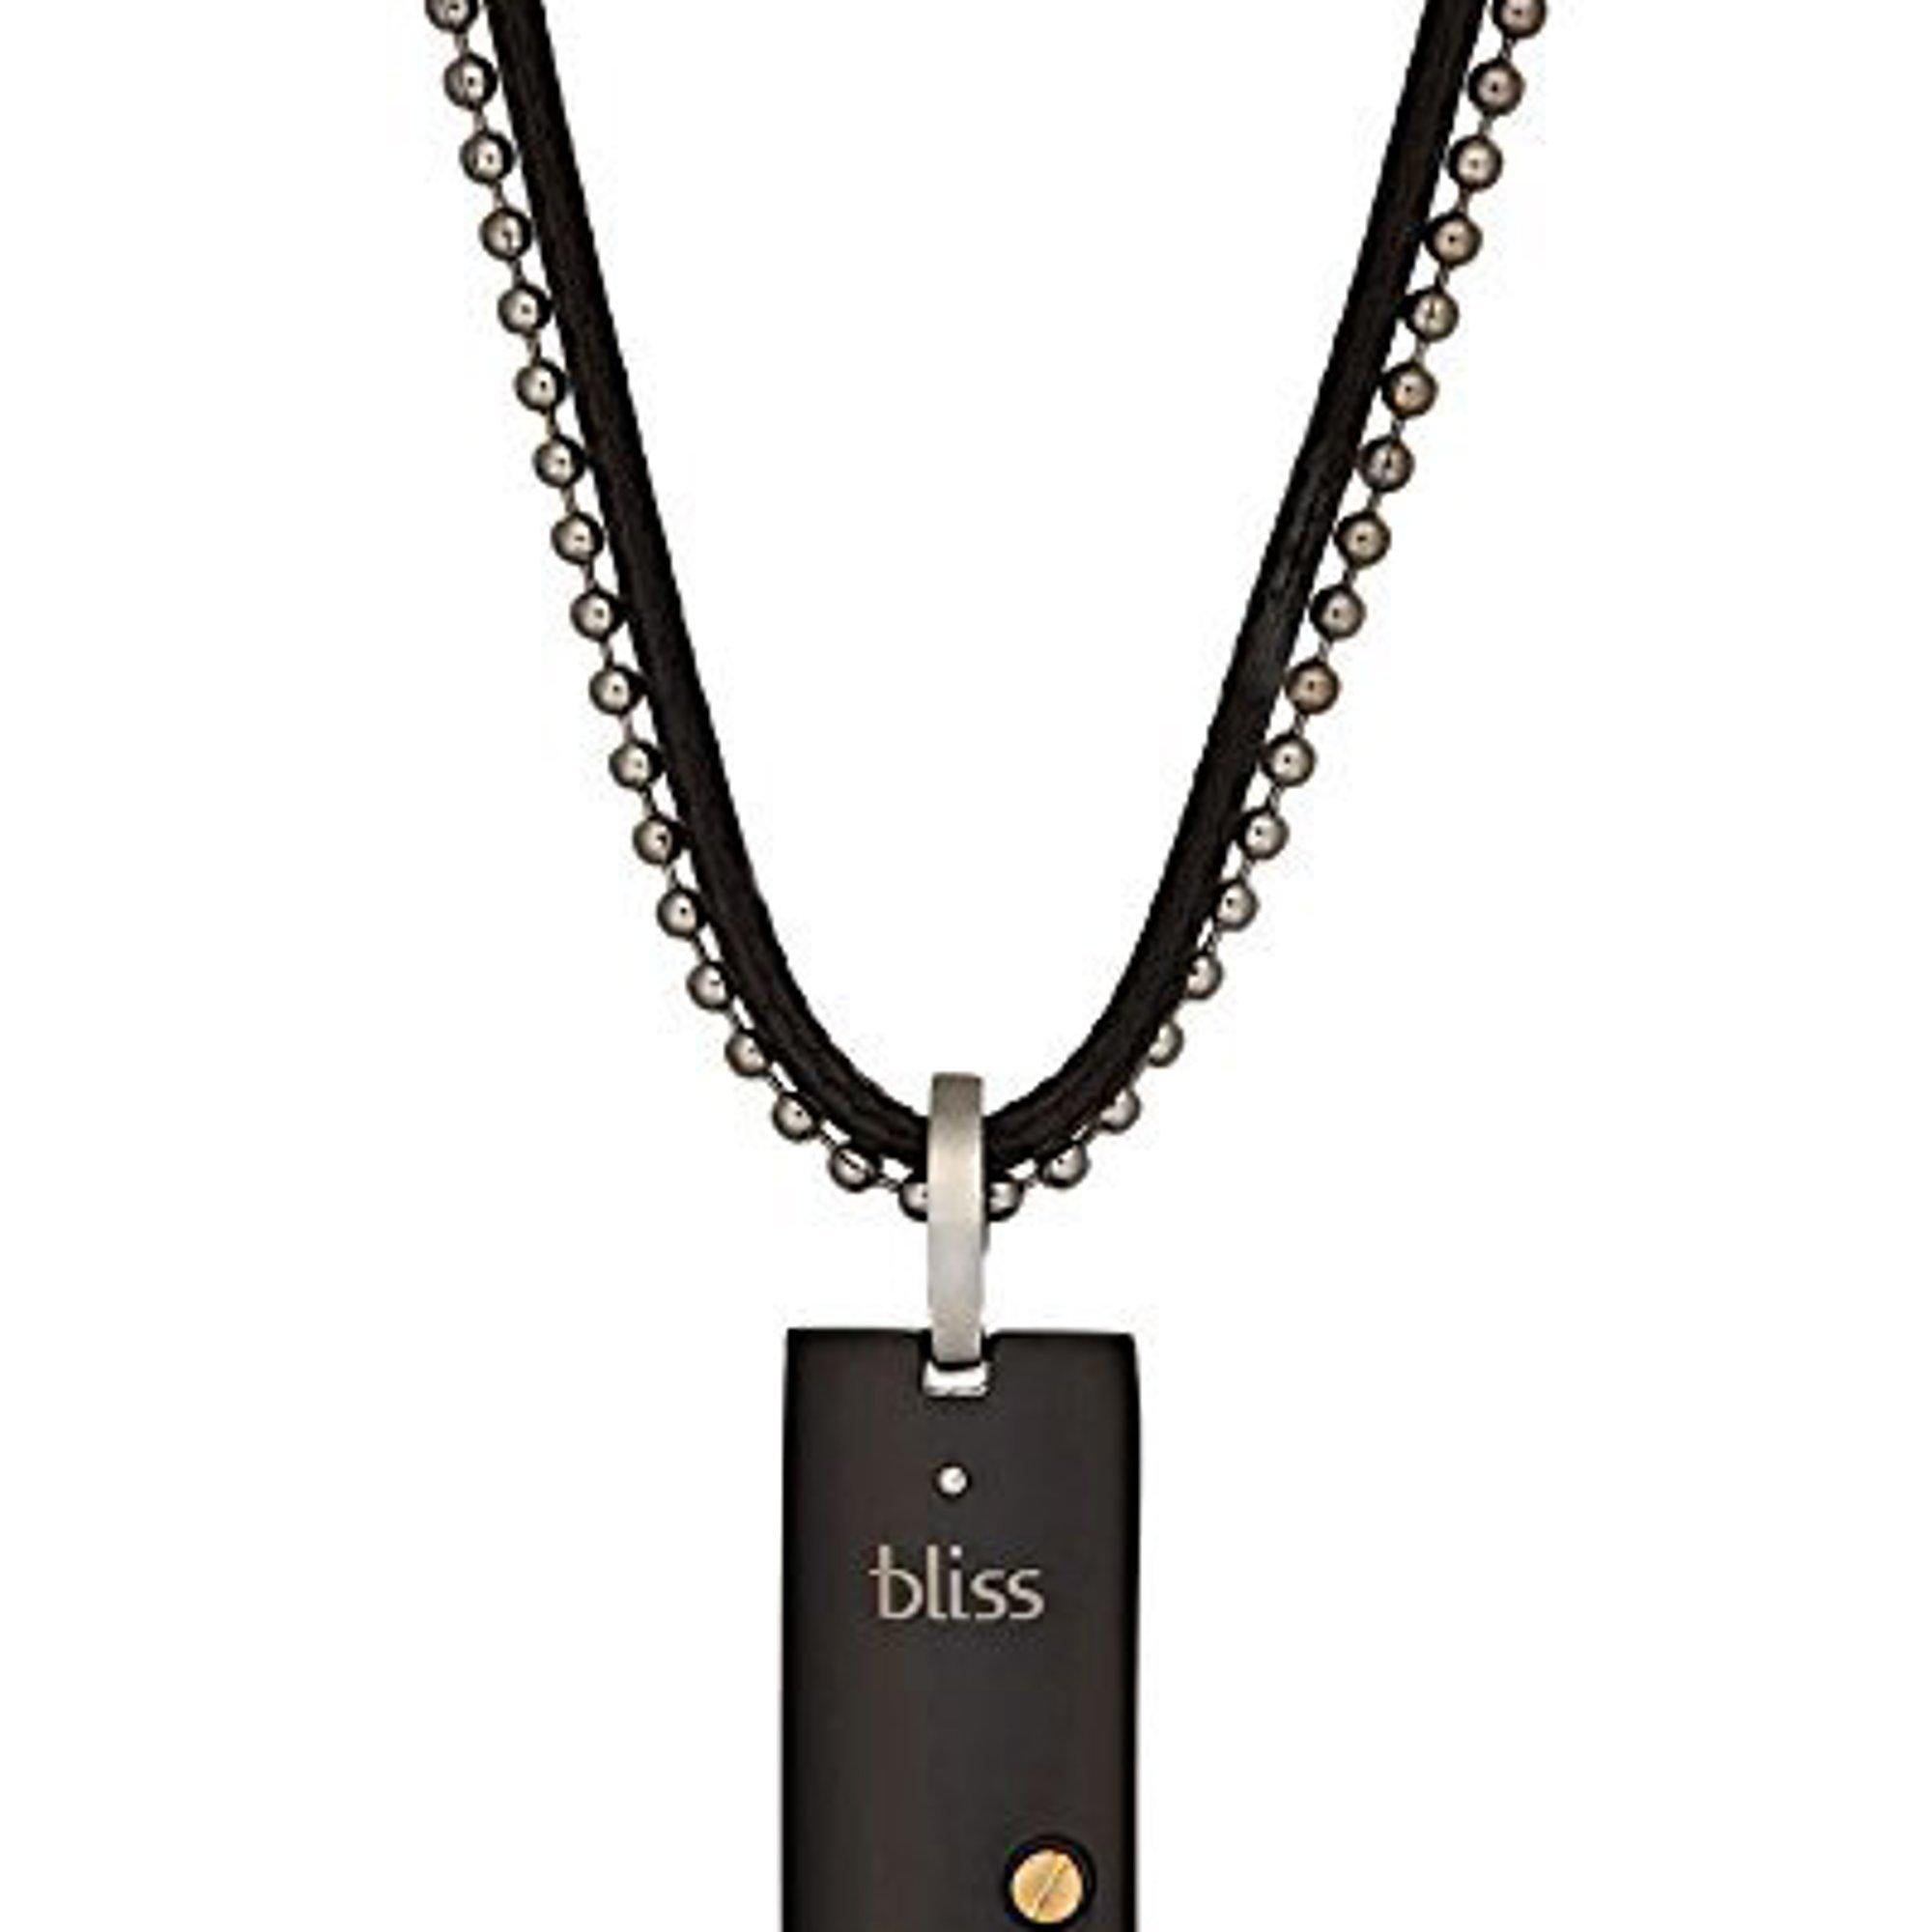 Bliss by Damiani Uomo Diamond Pendant Necklace Black Steel 18K Yellow Gold In New Condition For Sale In New York, NY